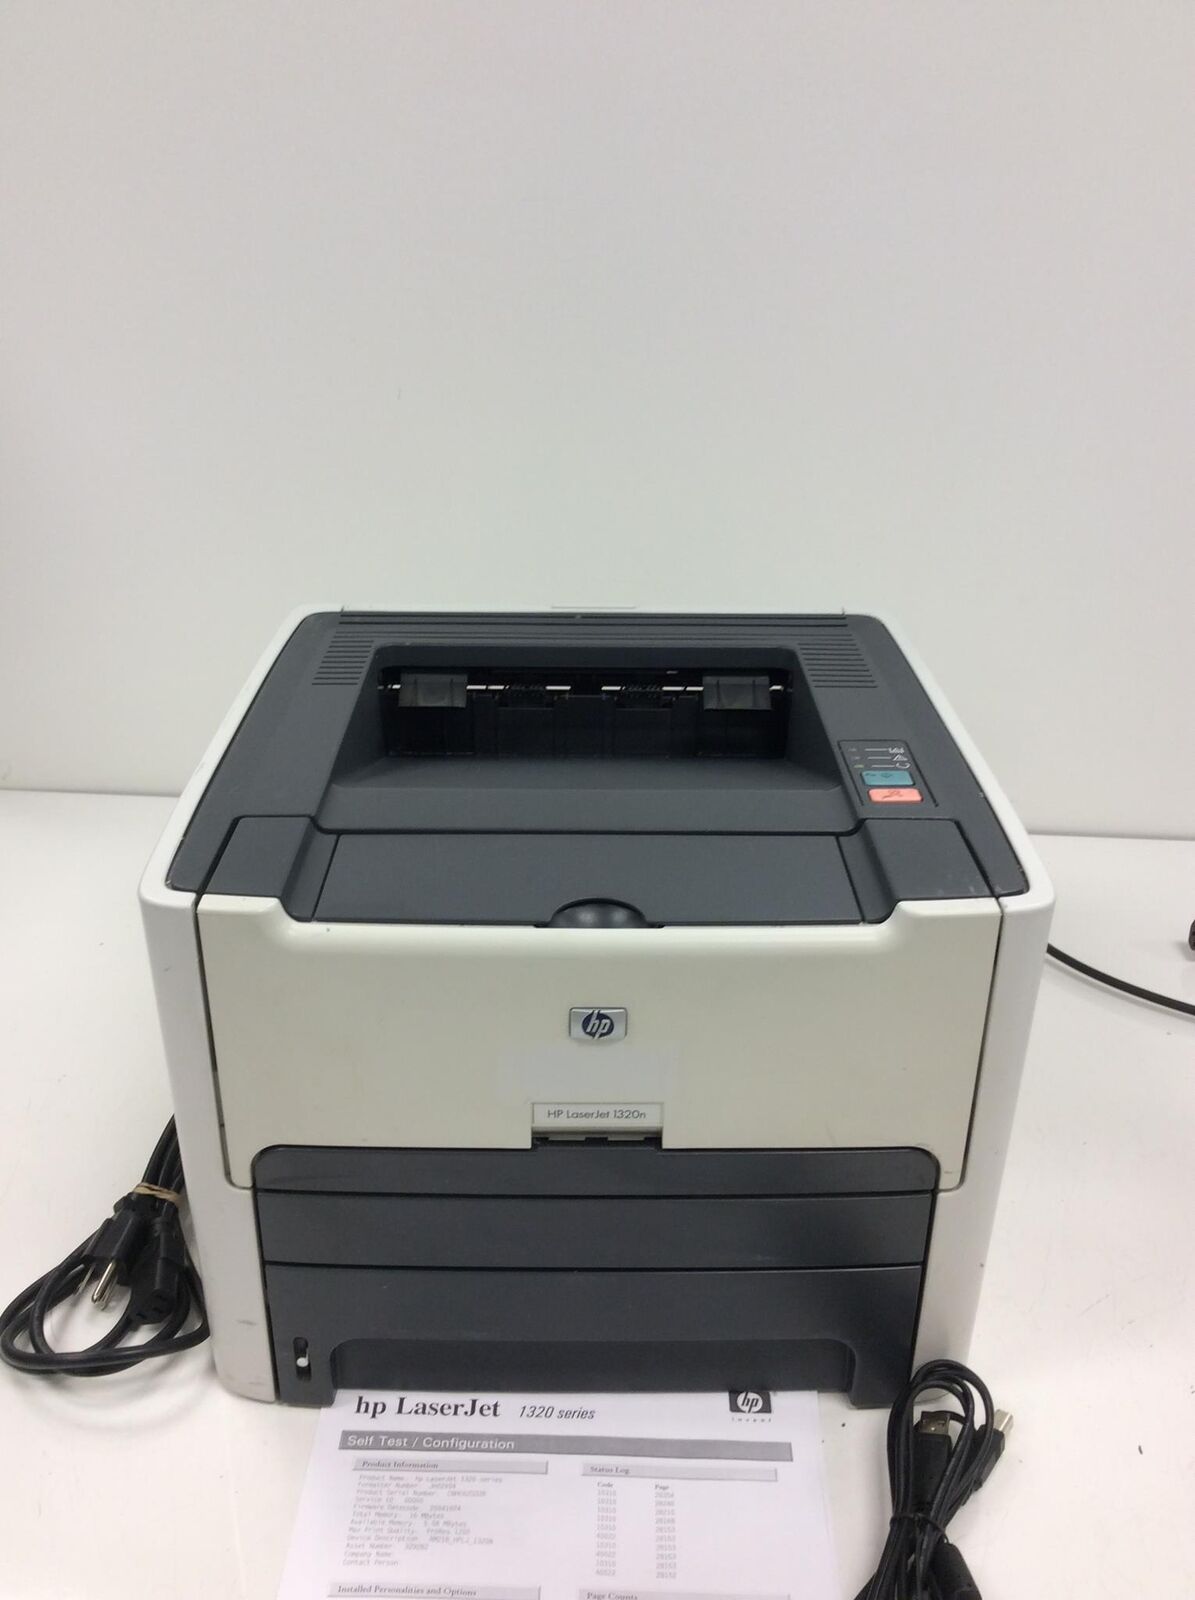 Hp Laserjet 1320N Q5928A Printer 16 Mb Page Count 28363 Usb Network Used Works